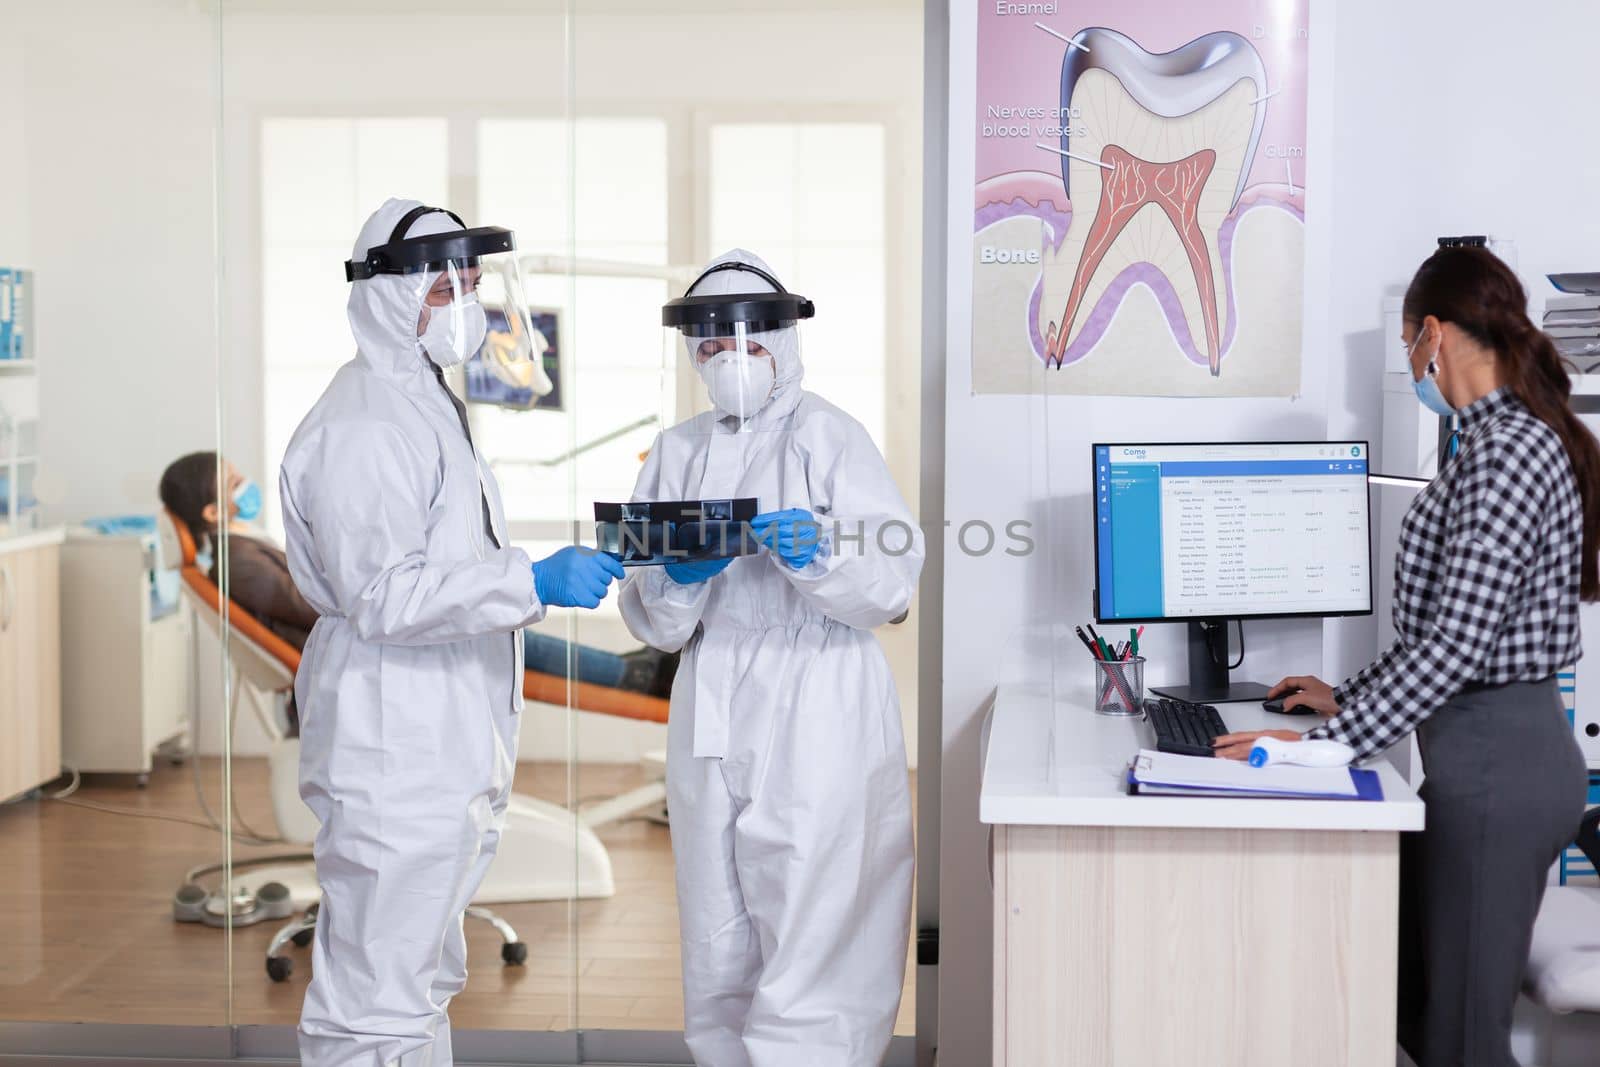 Stomatology team dressed up in ppe suit during global pandemic with coronavirus in dental reception holding patient x-ray, keeping social distancing. Receptionist with face mask as prevention.